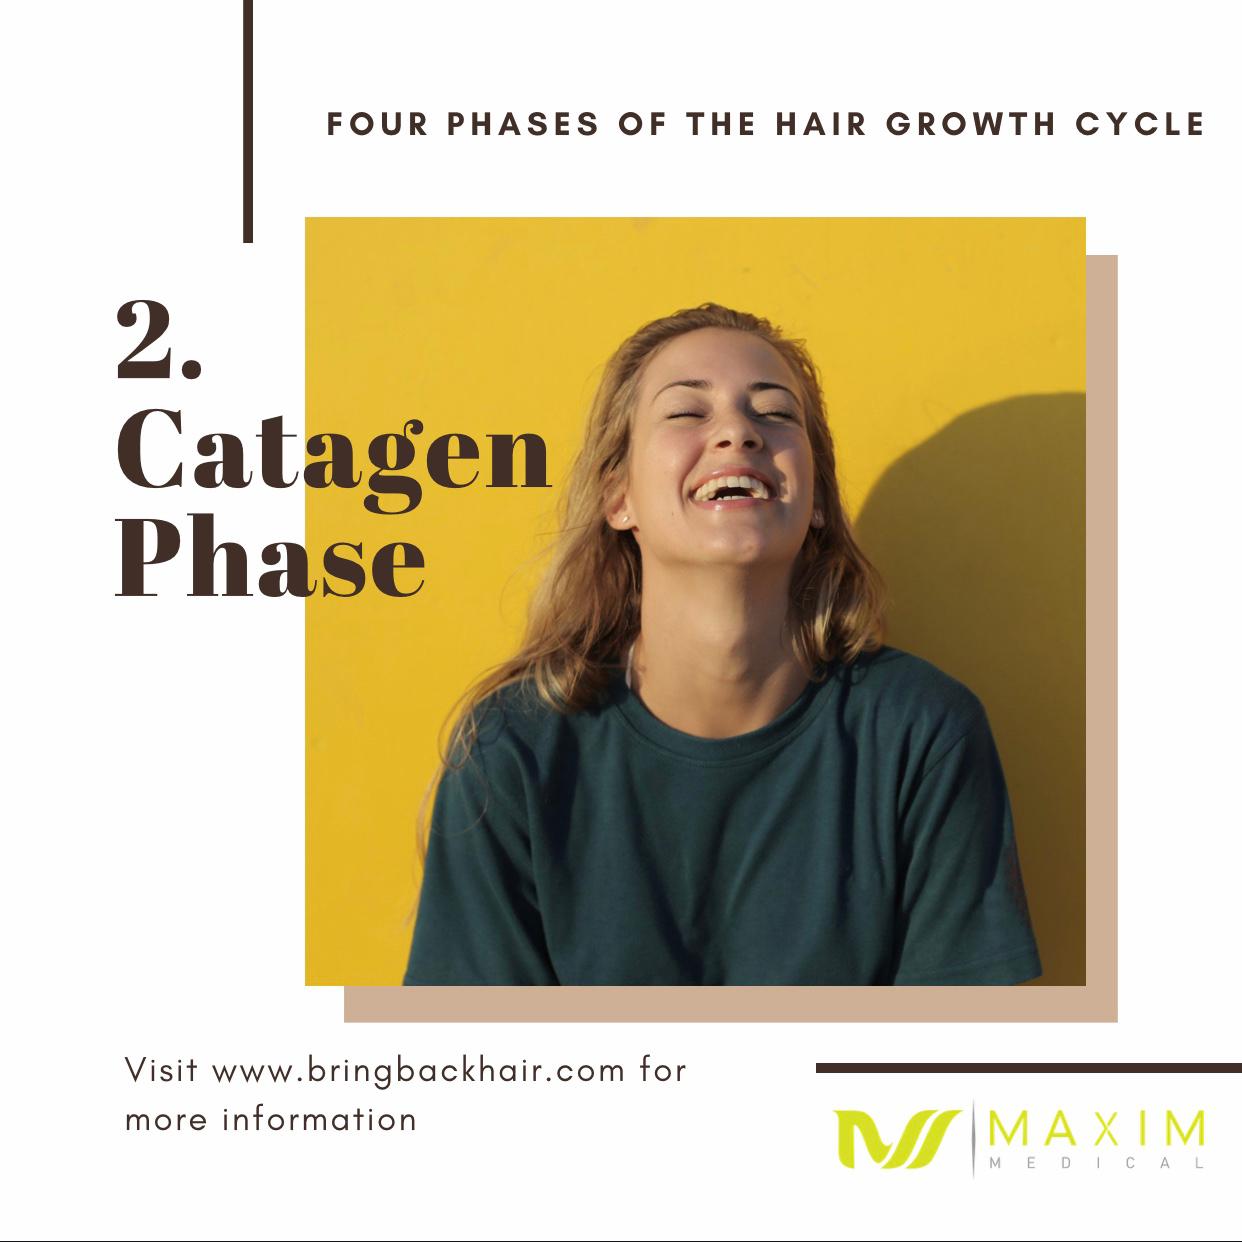 2. Catagen Phase
The Catagen phase refers to the period of time in which the hair detaches from the blood vessels and dermal papilla. During this stage, the hair stops growing as the blood flow is removed, depriving the follicle of much-needed oxygen and nutrients that would otherwise promote growth. This lasts for approximately two weeks and acts as a catalyst for the next stage, the Telogen phase.